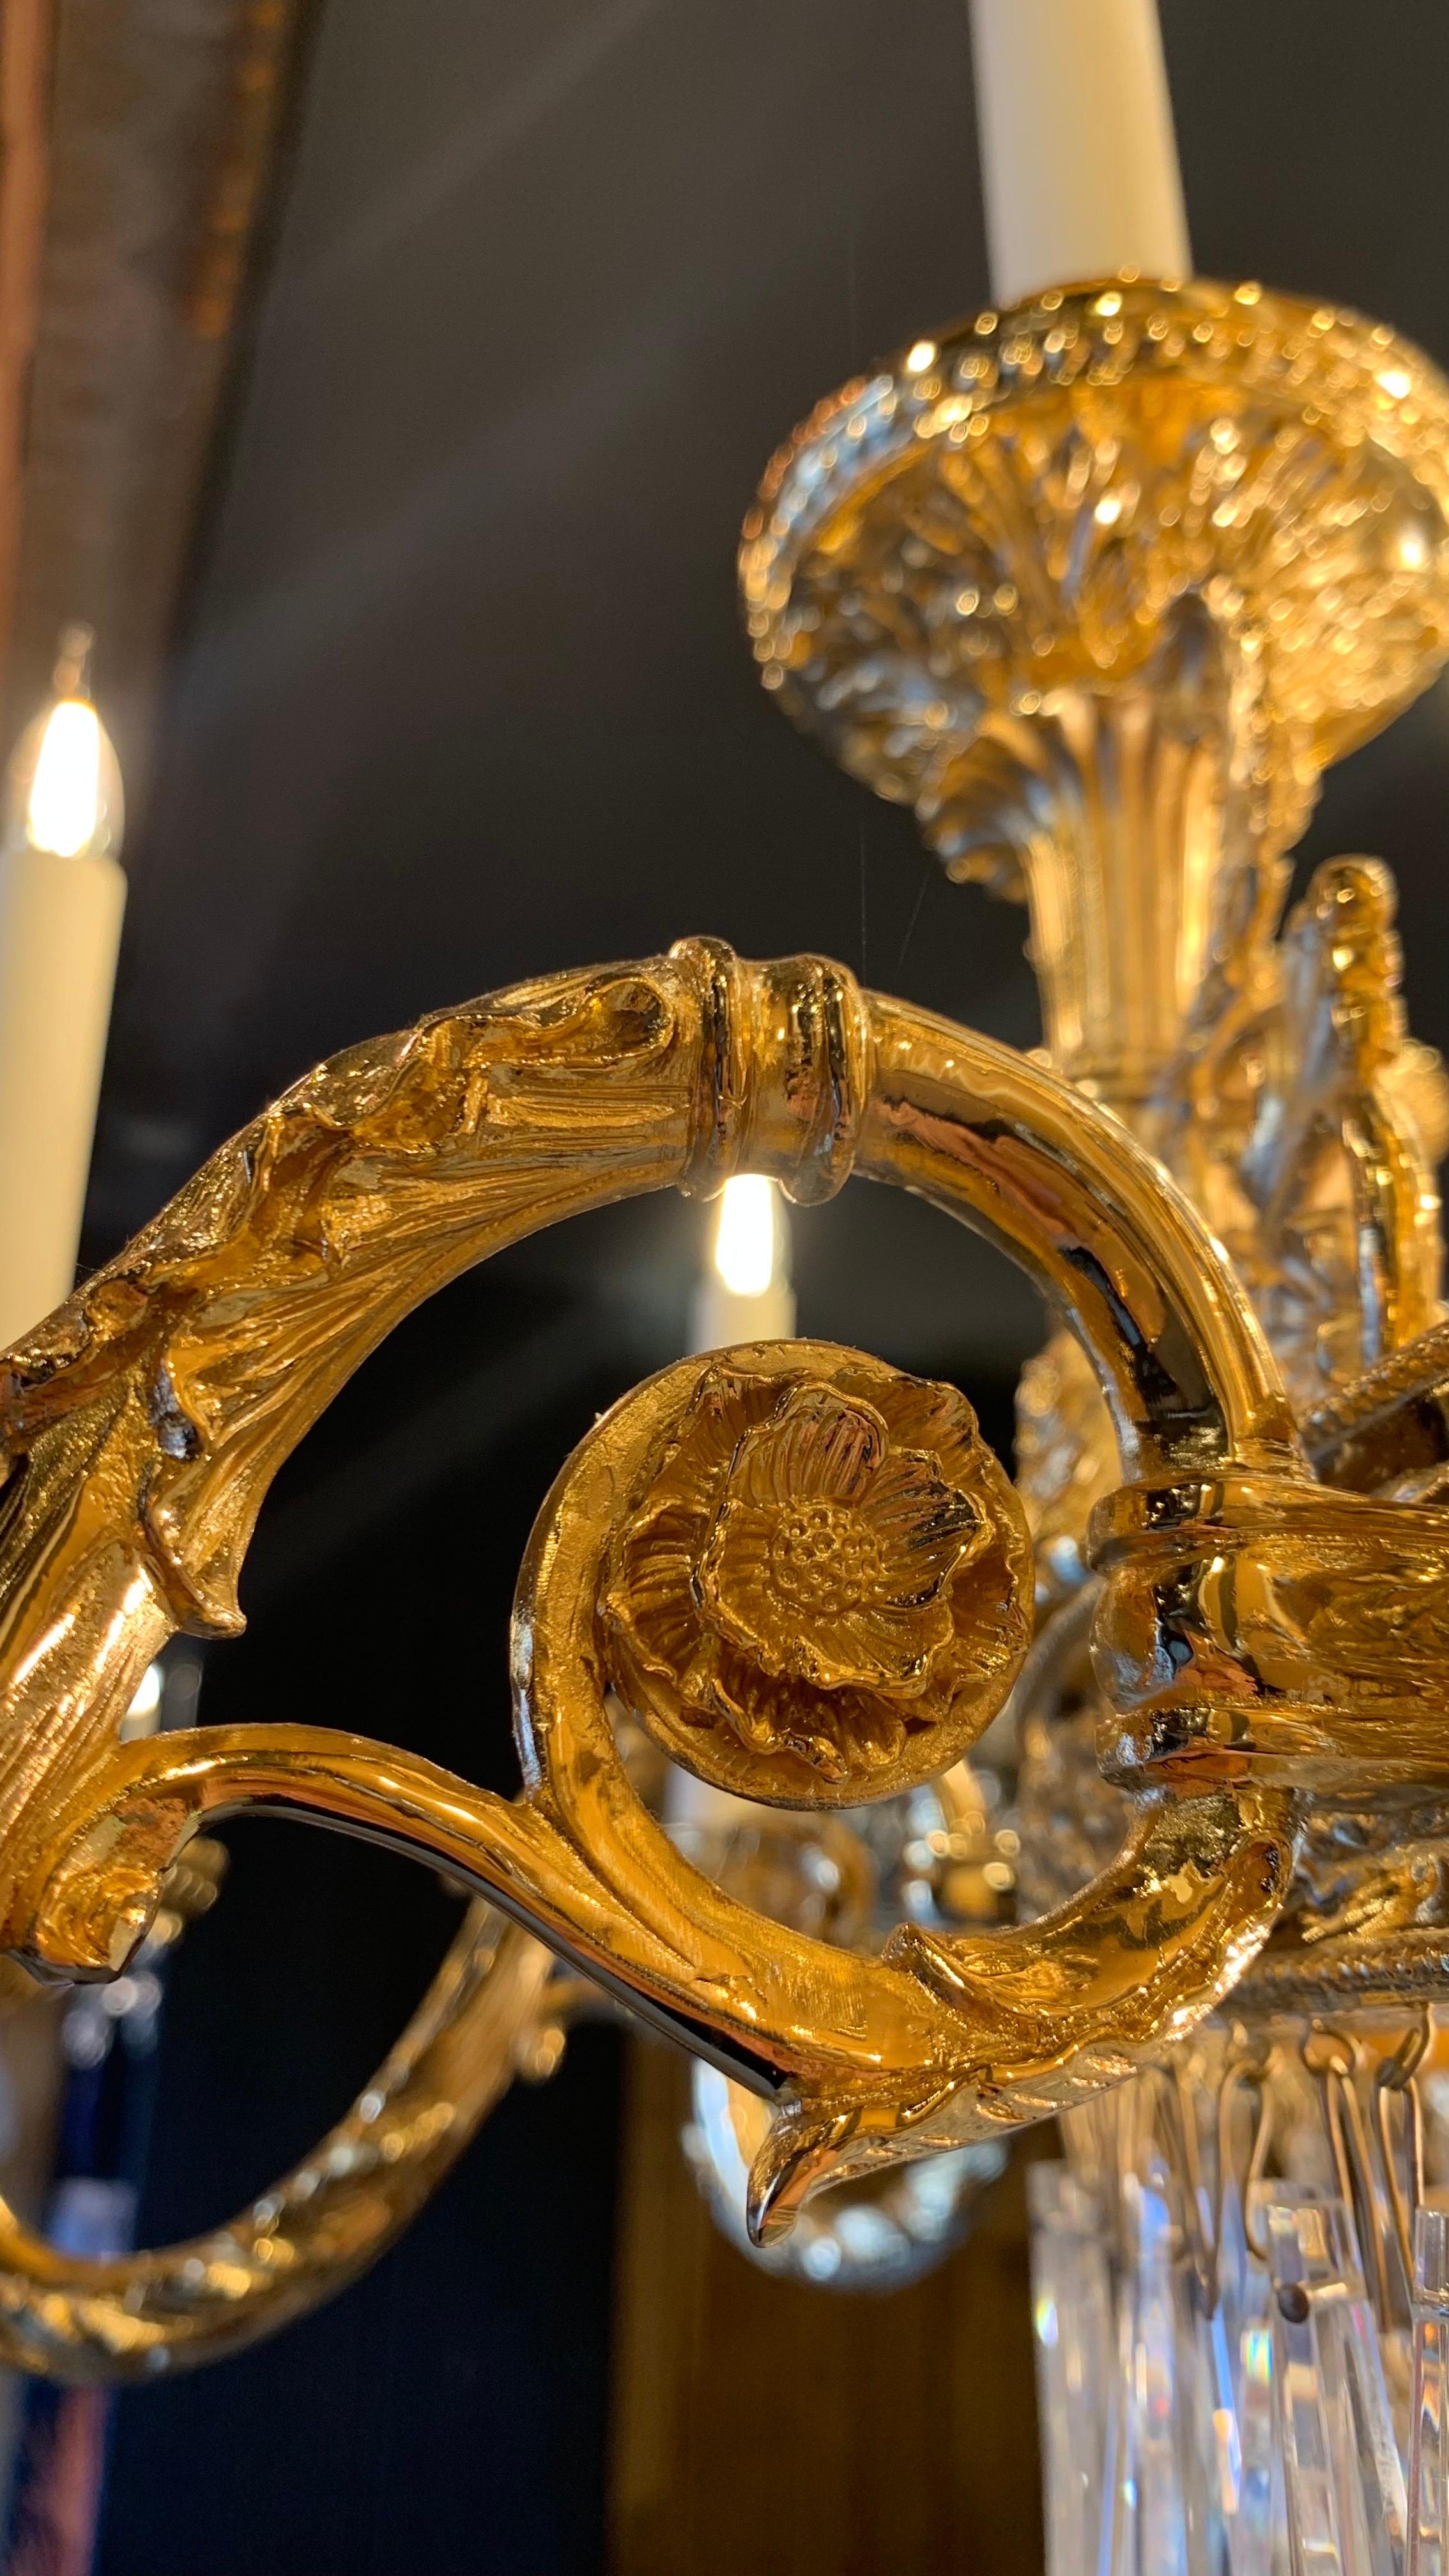 Napoleon III 19th Century Basket Chandelier with 36 Lights in 24K Gold Bronze and Crystal For Sale